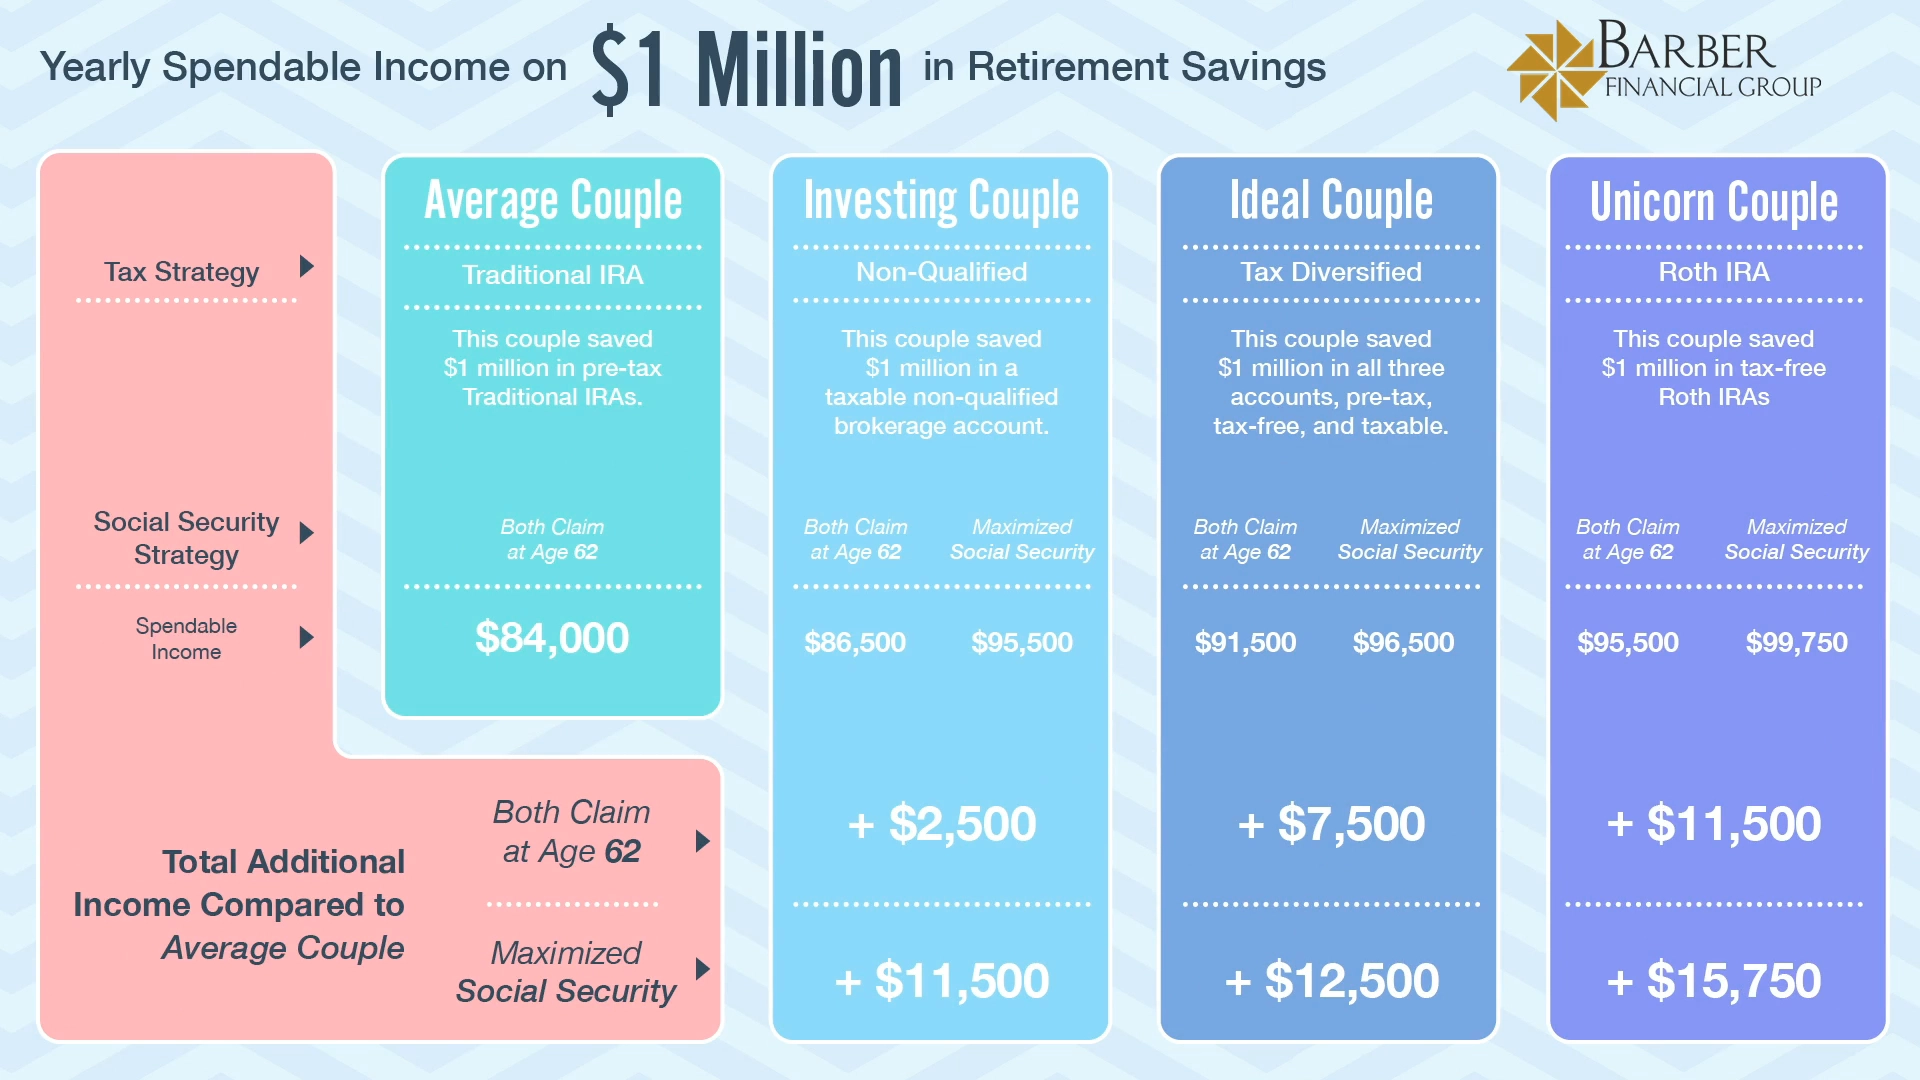 Retiring with $1 Million - Yearly Income All Couples